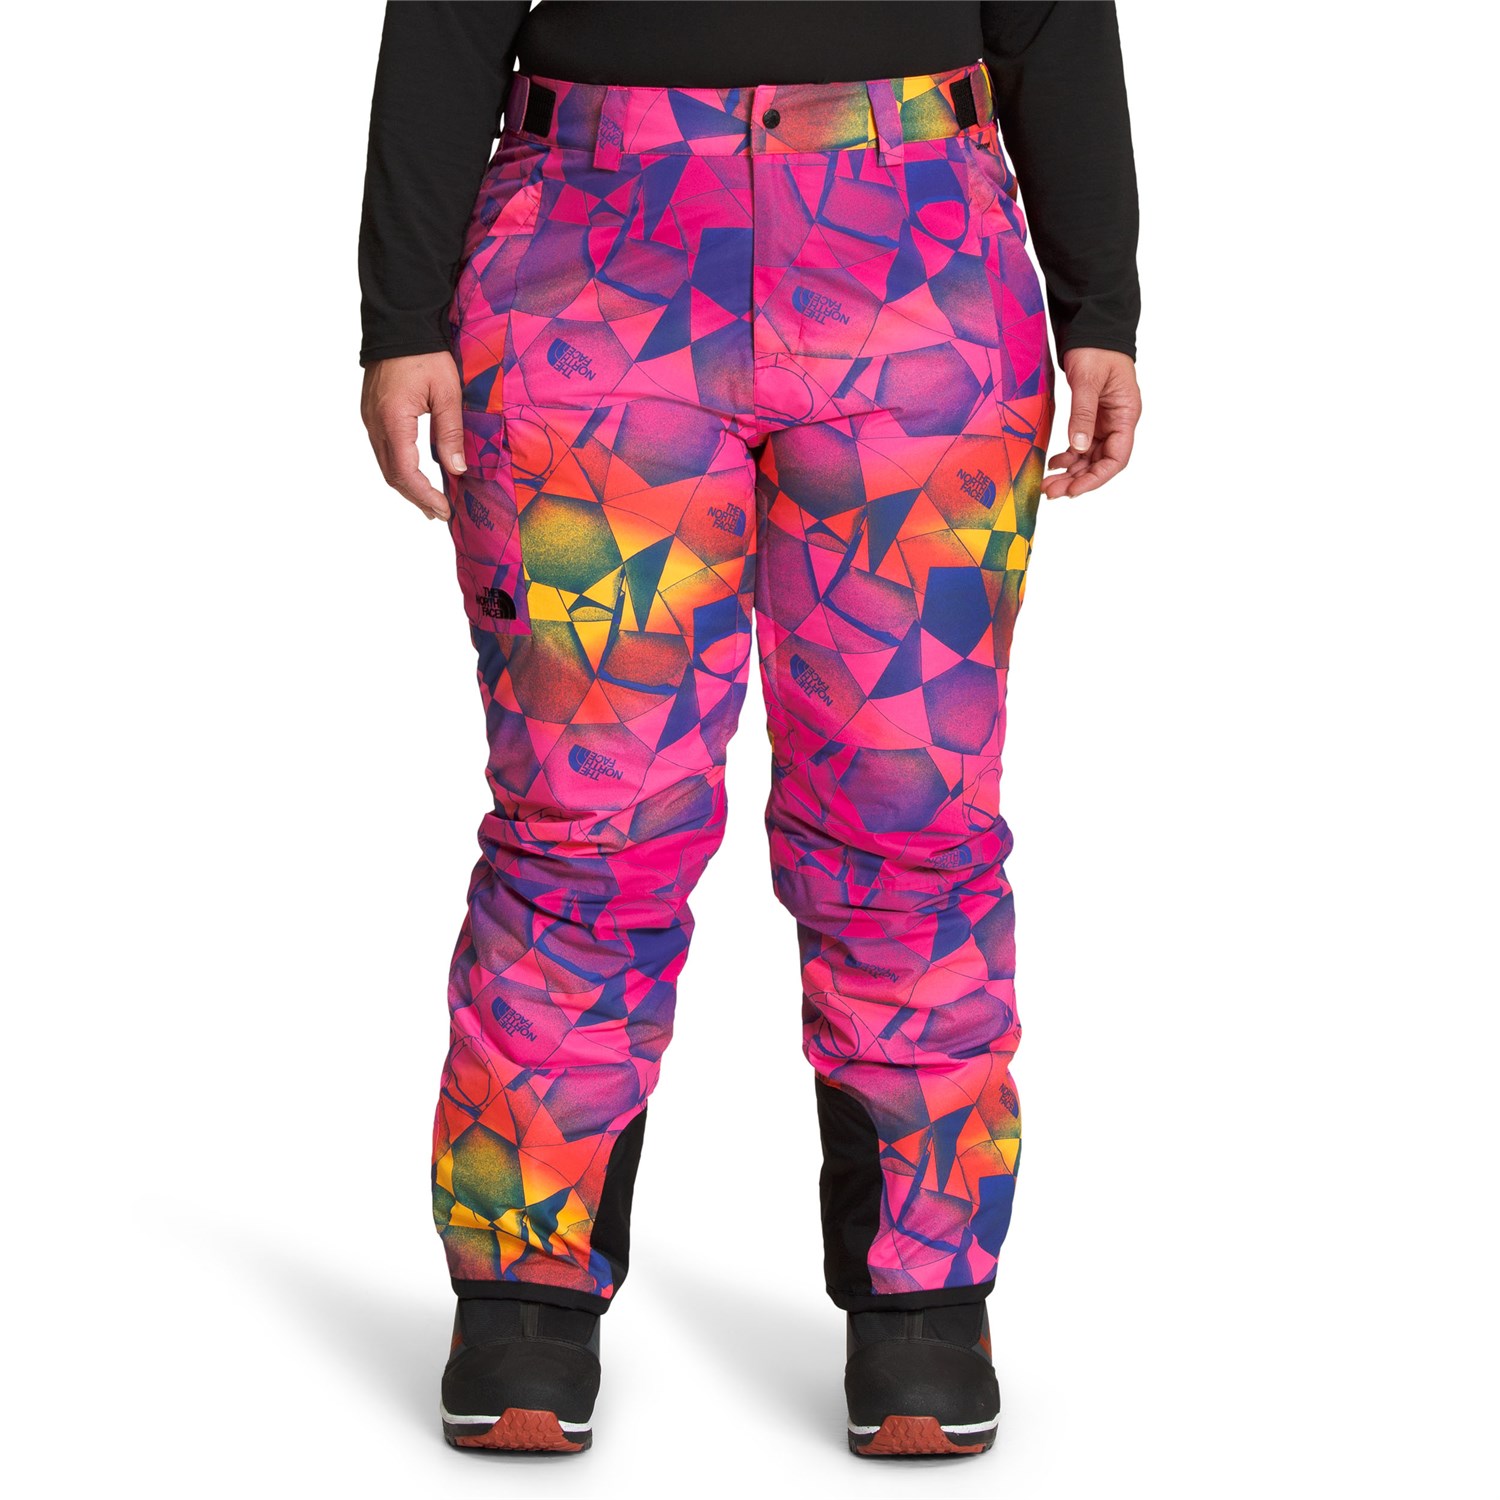 Брюки The North Face Freedom Insulated Plus Tall, цвет Mr. Pink Expedition Print брюки the north face freedom insulated plus цвет gardenia white